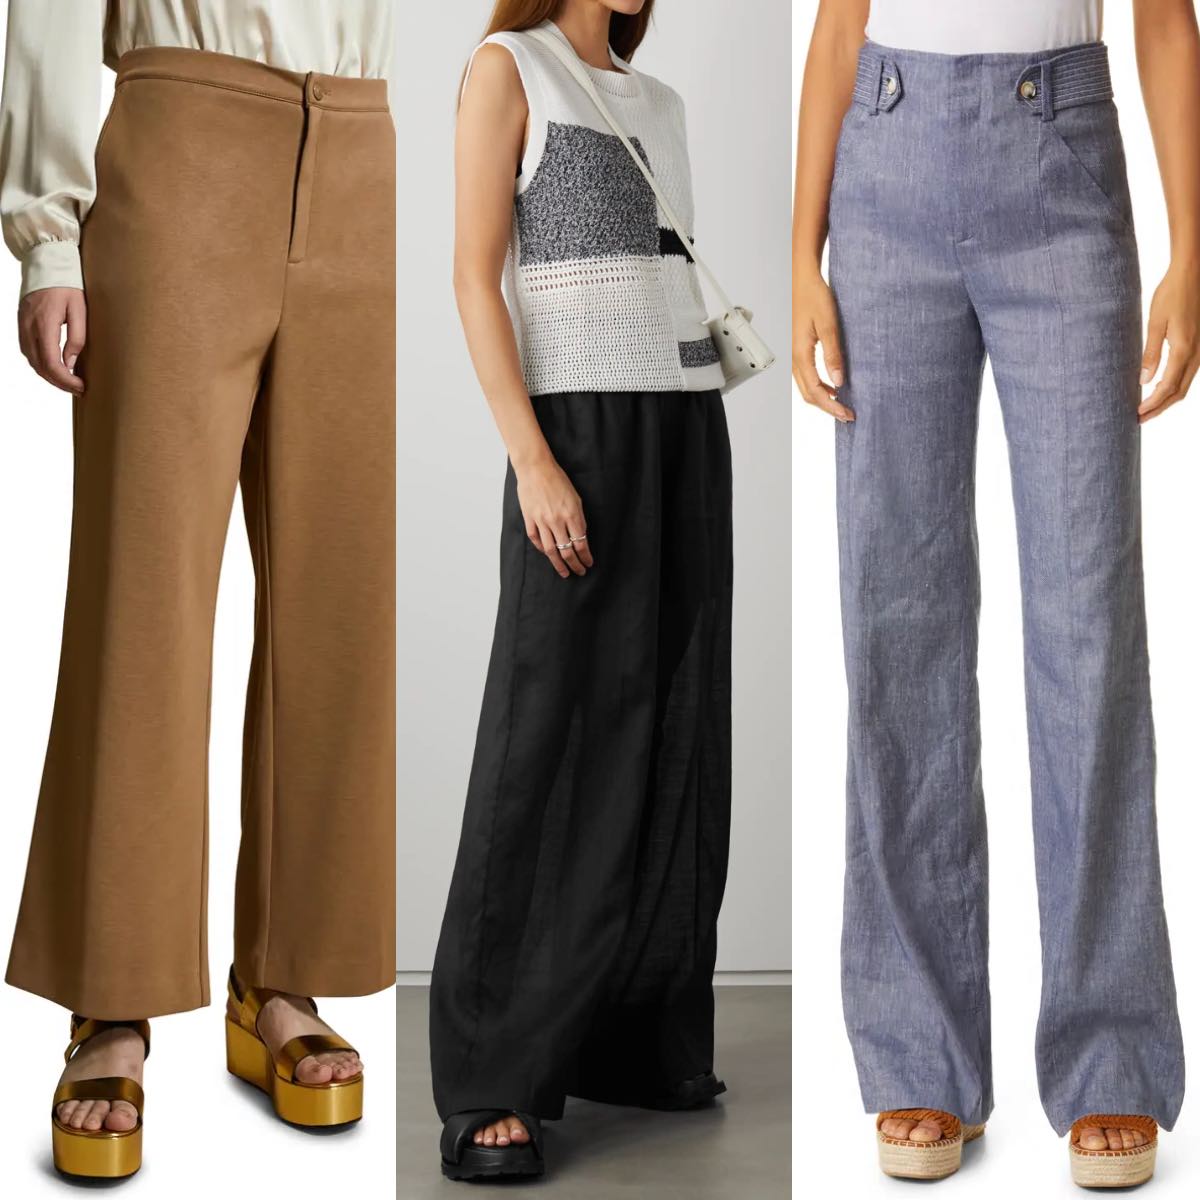 3 women wearing flatform sandals with wide leg pants and trousers.